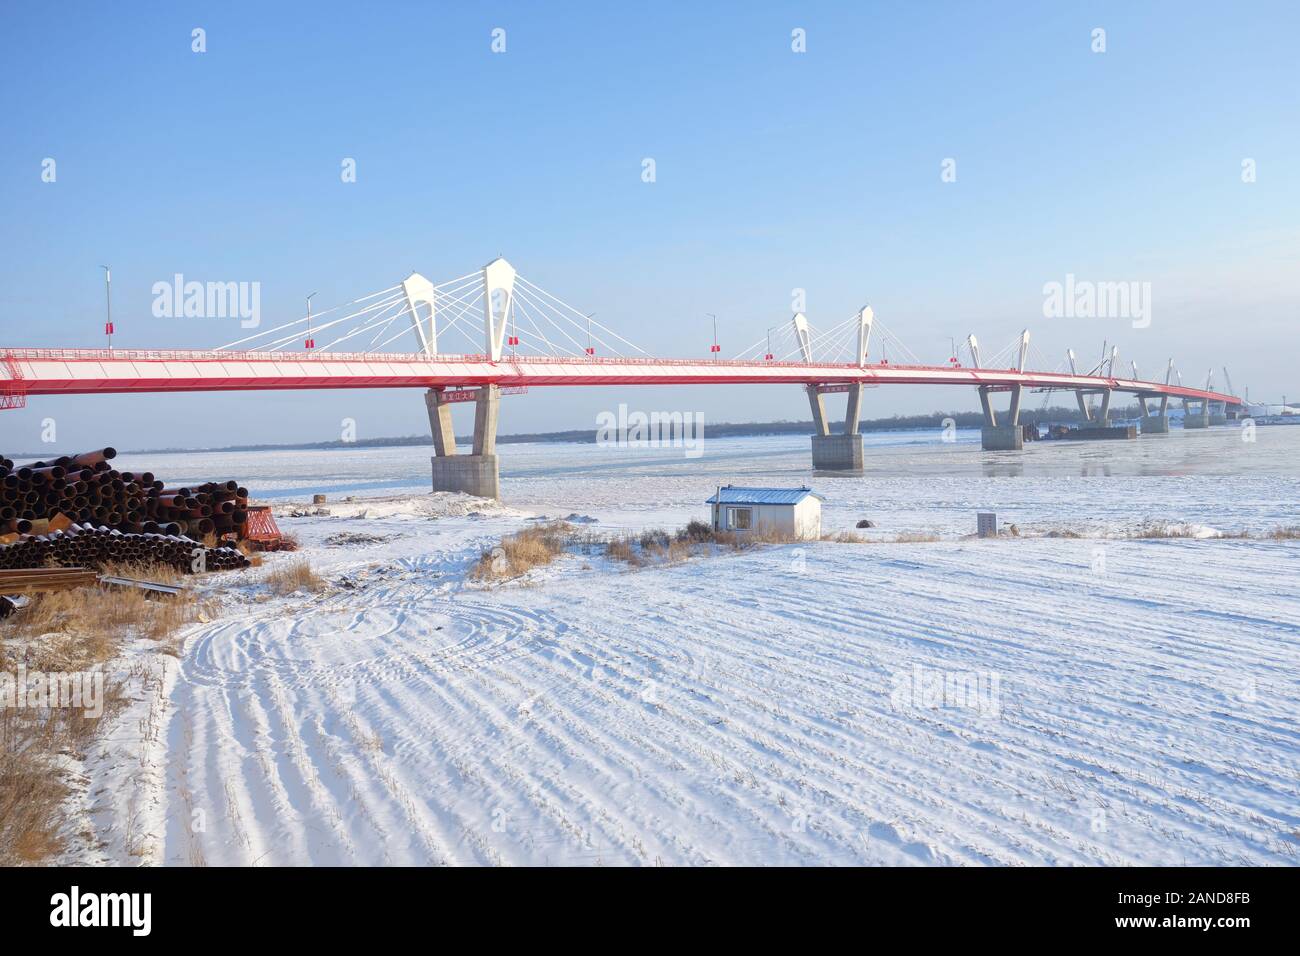 A general view shows the new cross-border automobile cable-stayed bridge across the Heilongjiang River, also known as Amur River connecting the Russia Stock Photo